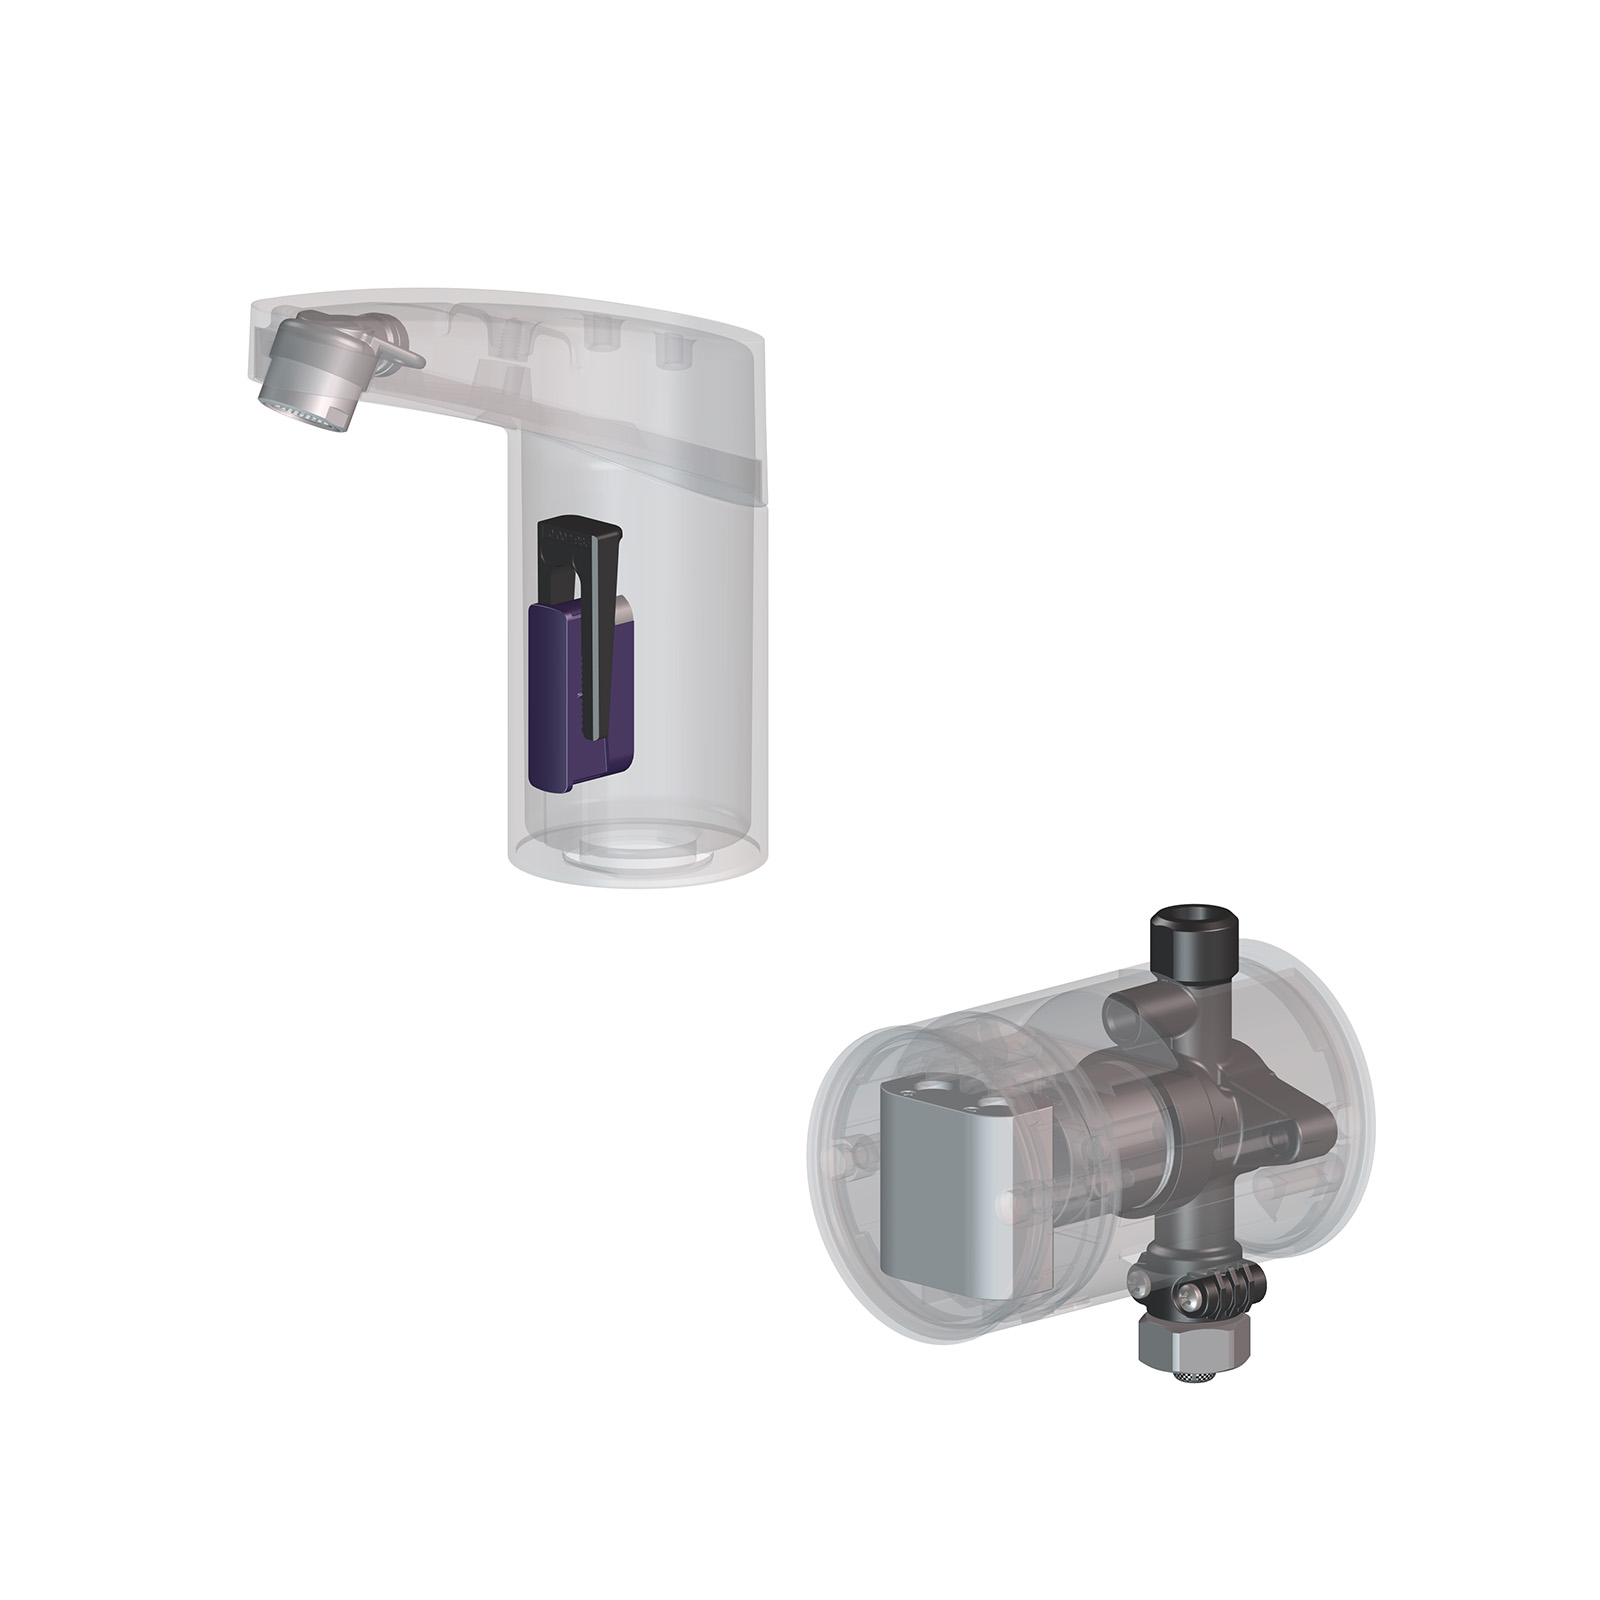 Sensor Washbasin Faucets with Hydraulic Unit with mixing